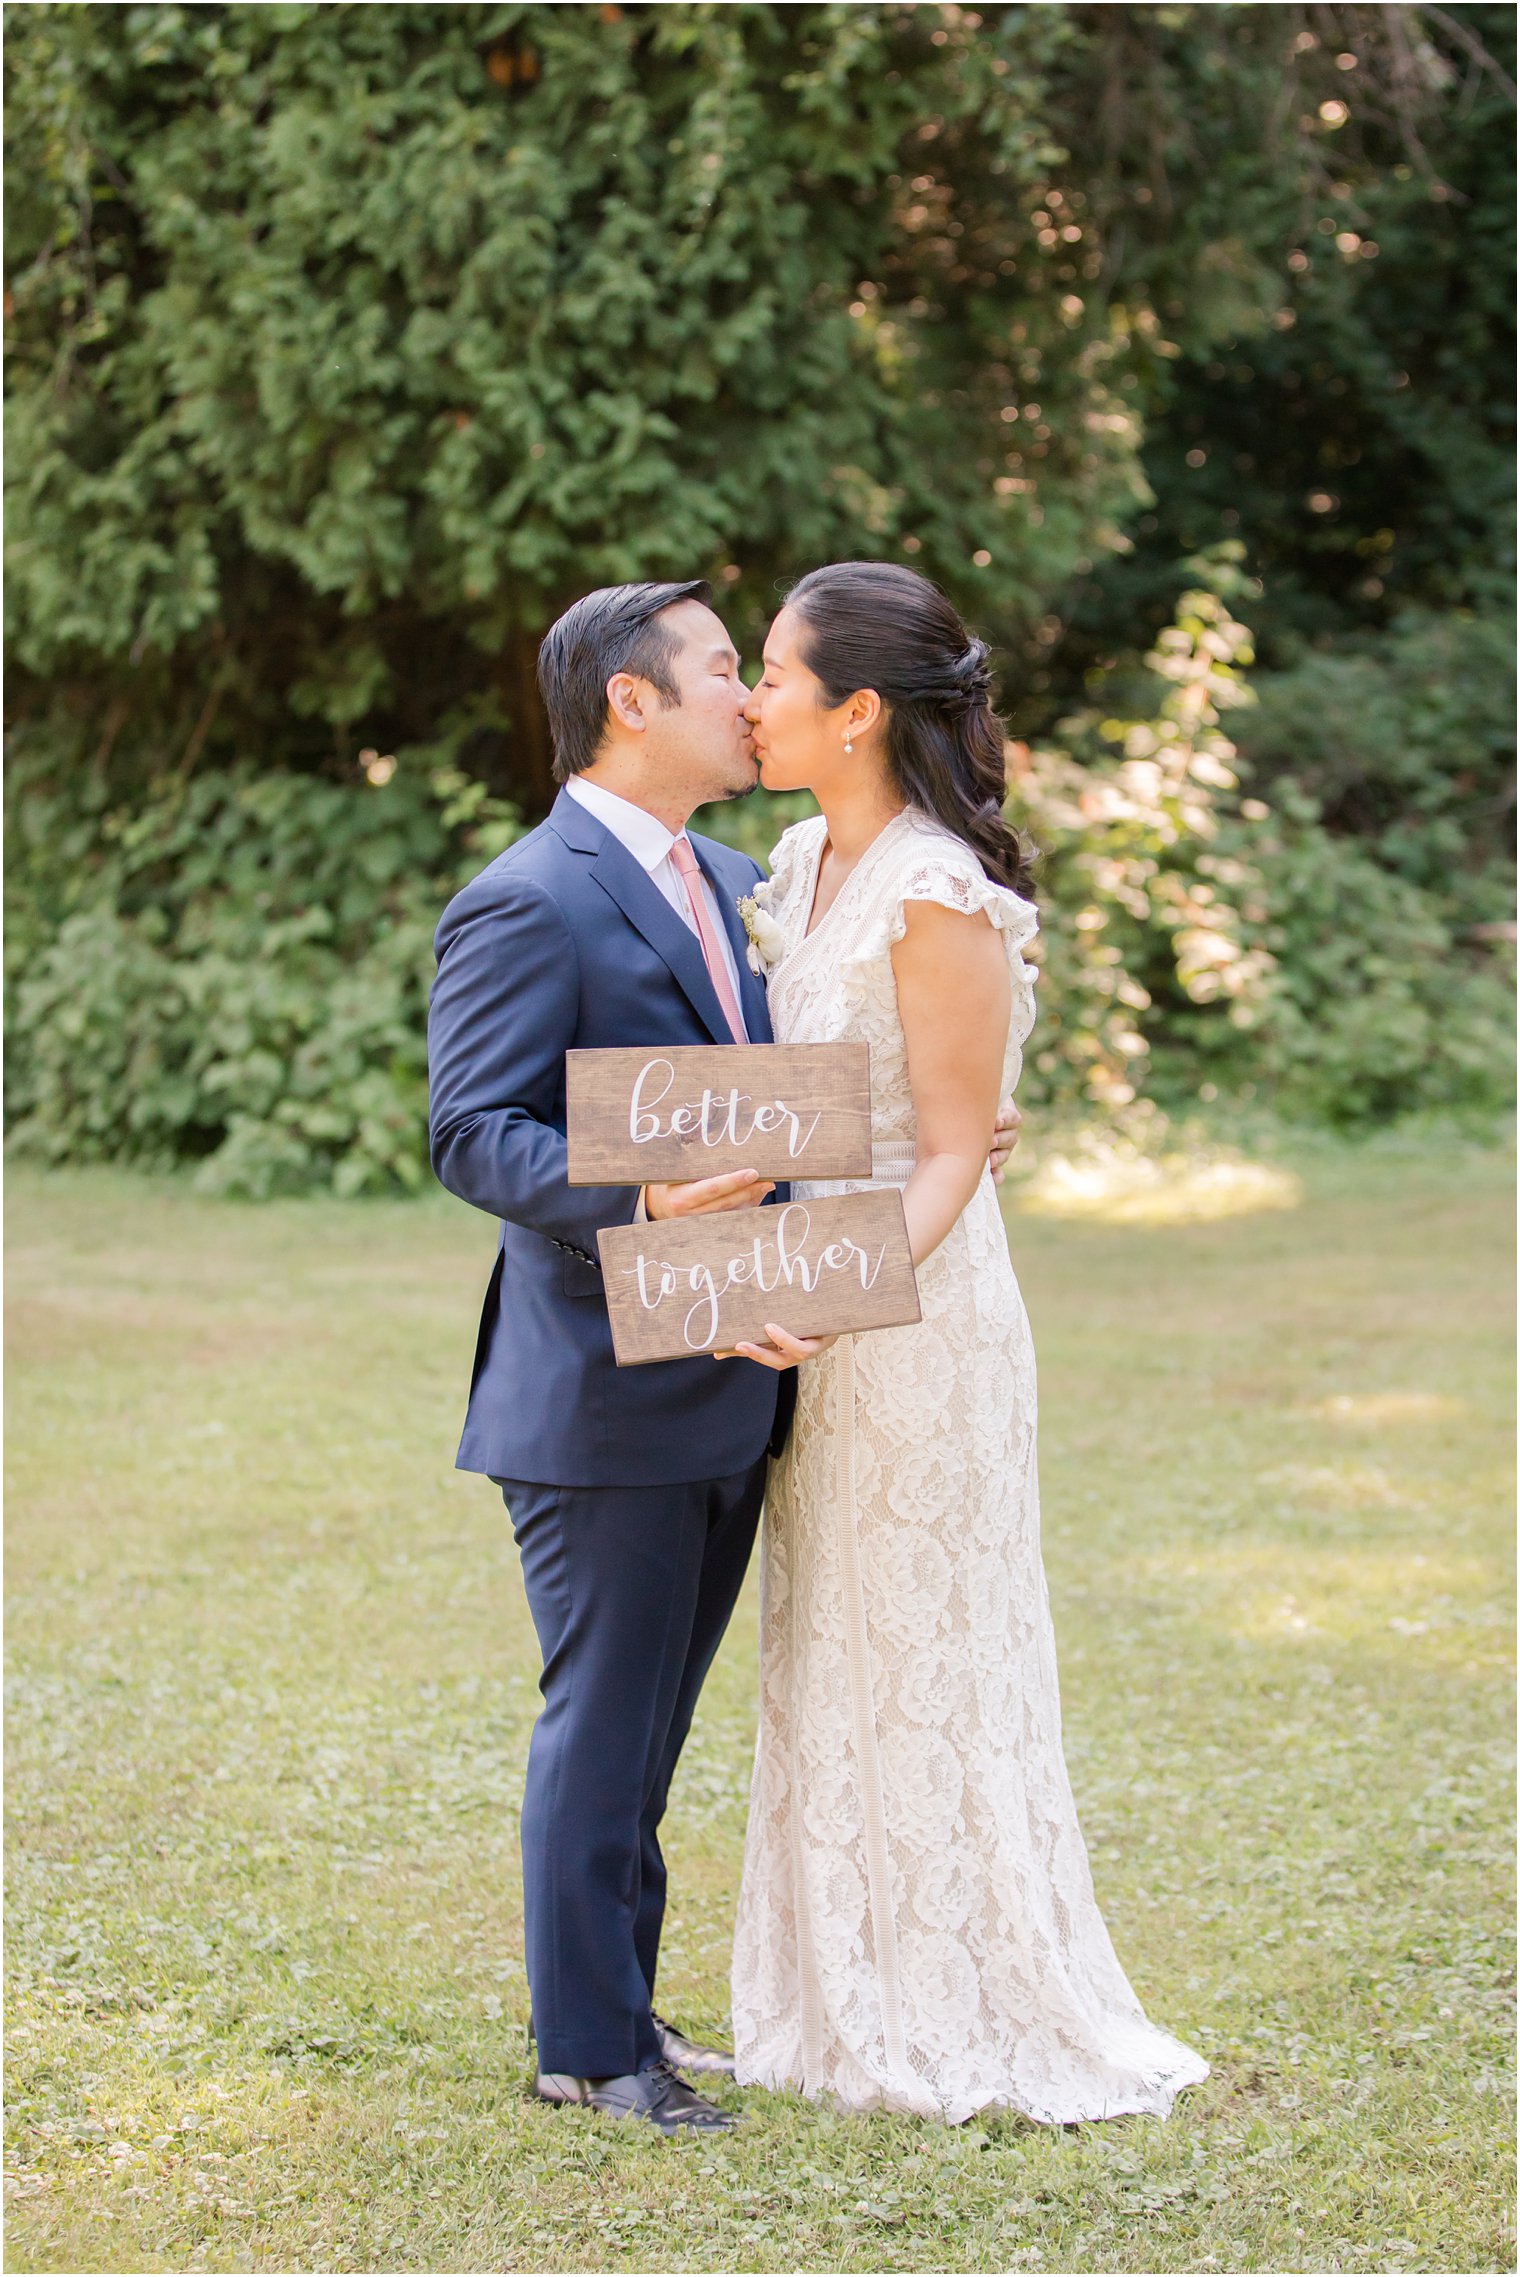 Bride and groom kissing and holding "Better Together" sign | NJ Intimate Wedding with a Gorgeous Arch by Idalia Photography